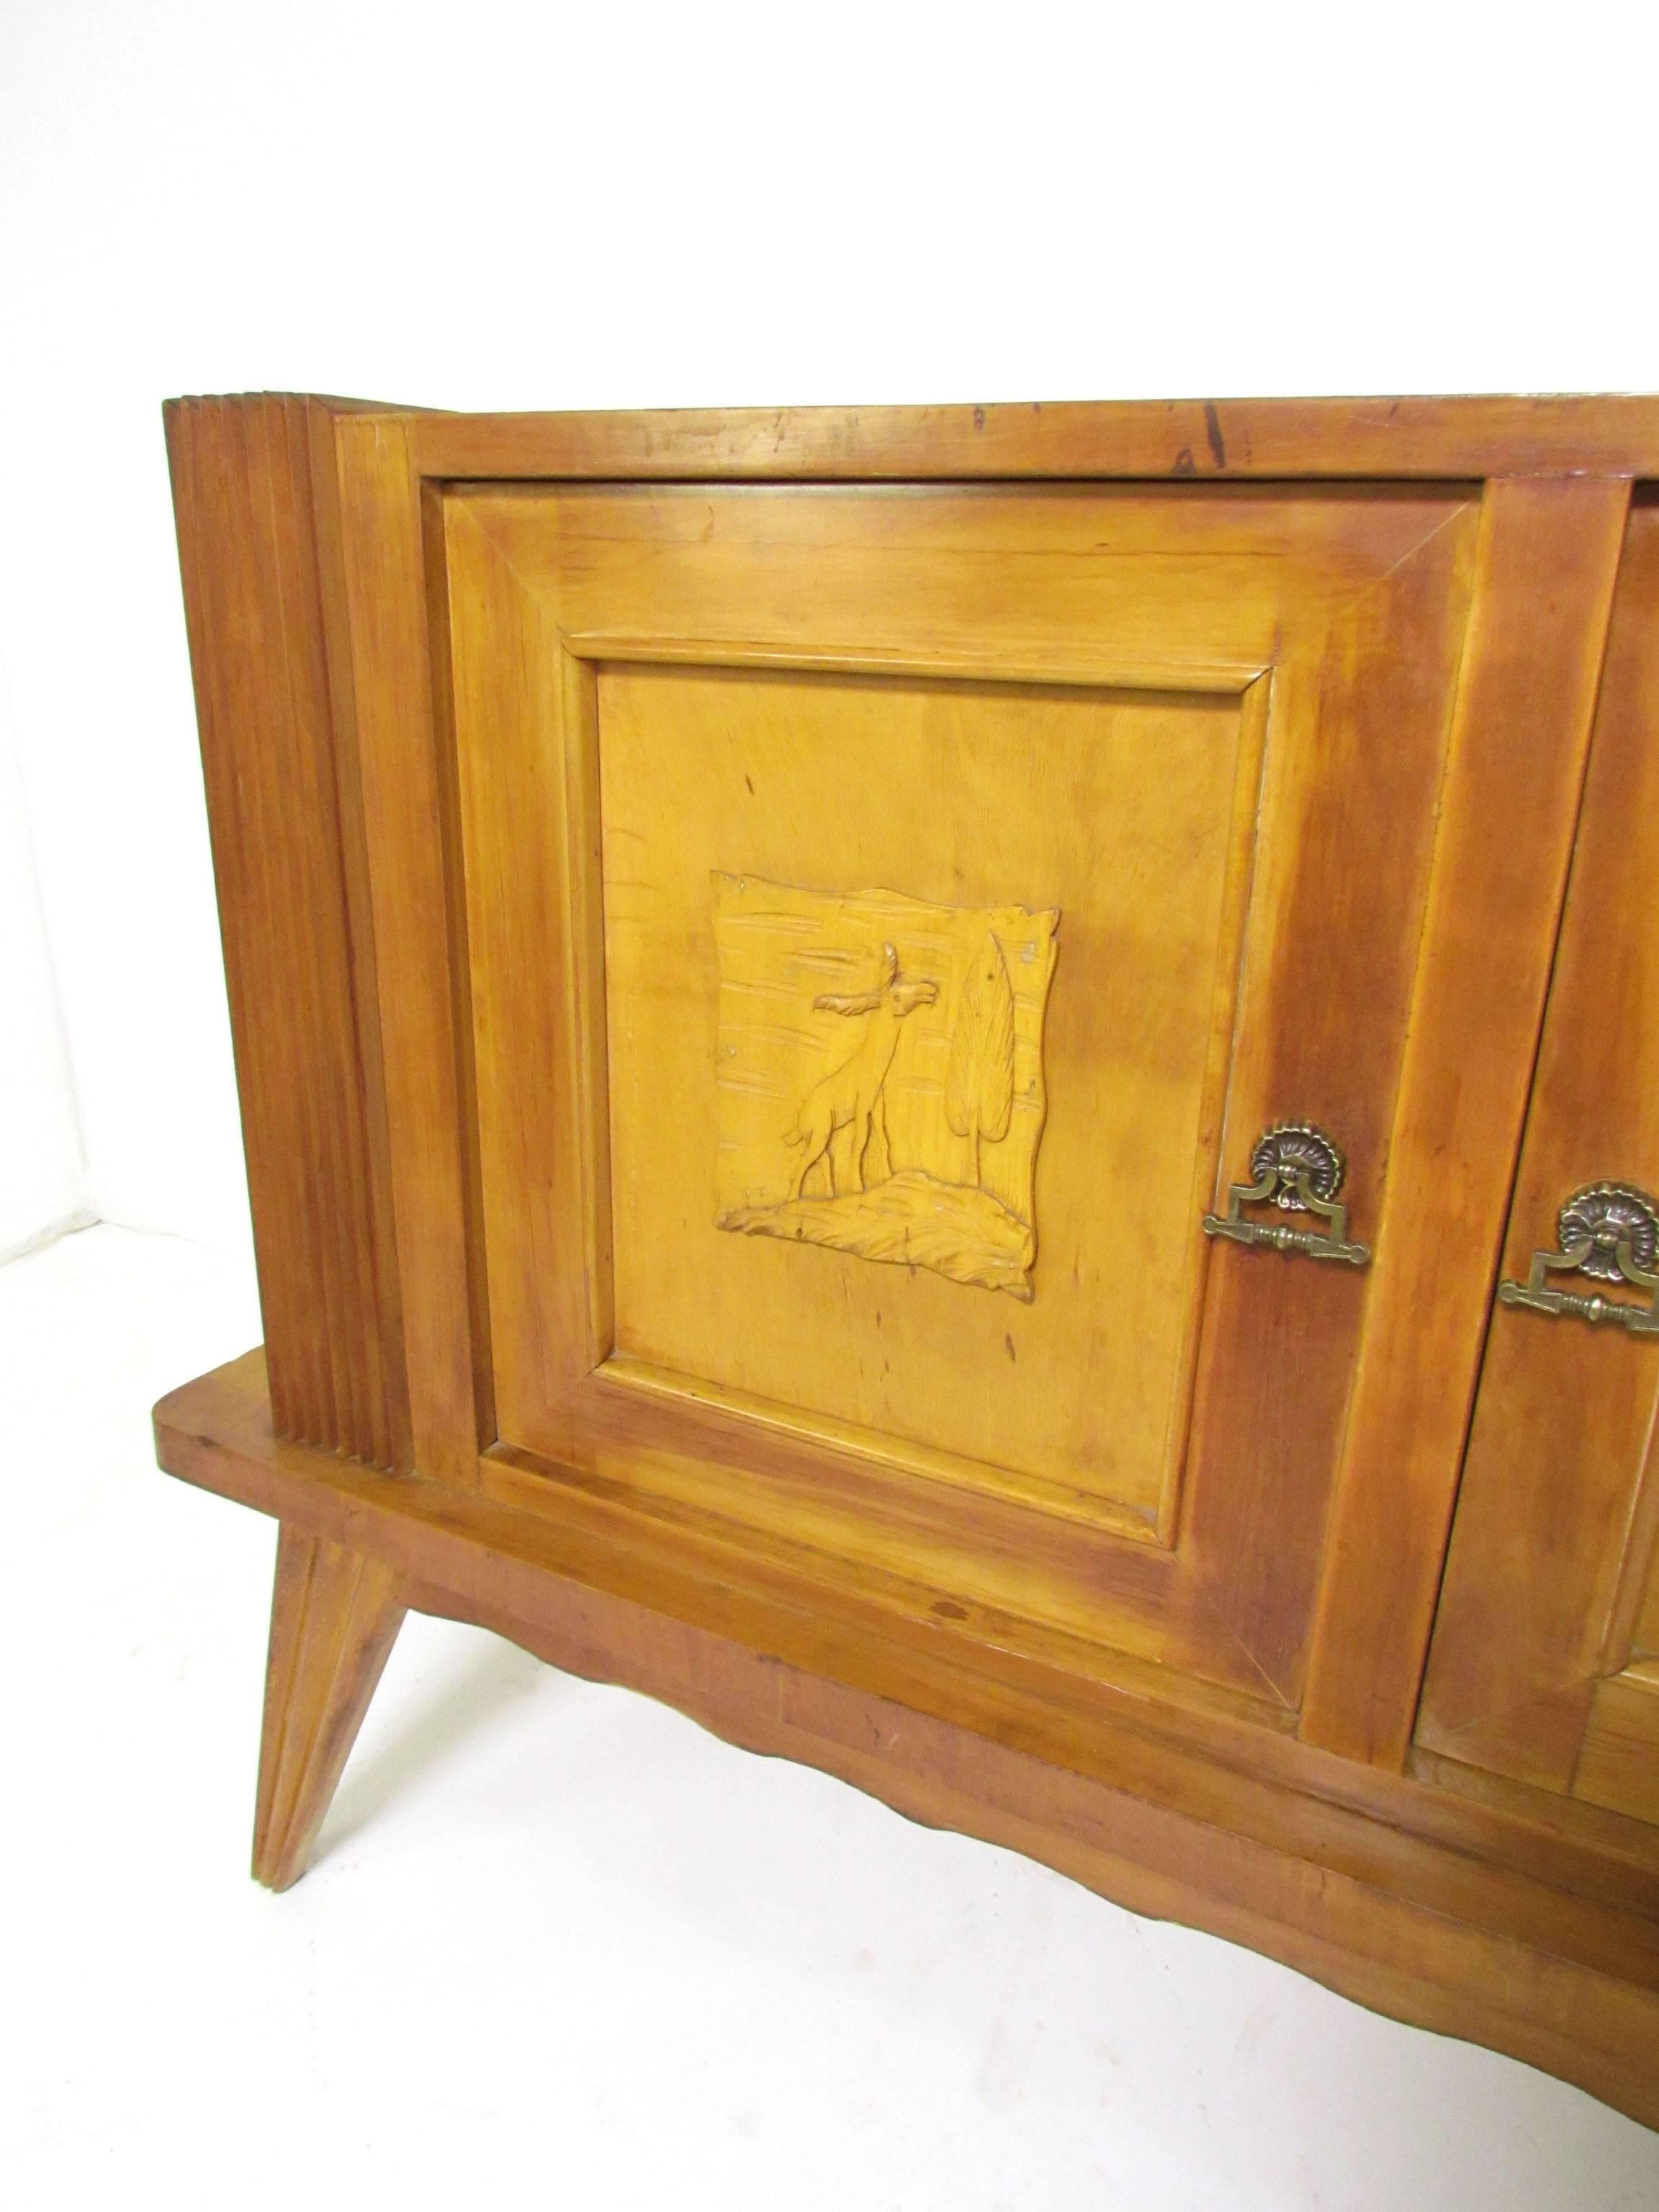 Mid-20th Century Italian Art Deco Sideboard with Hand-Carved Decorative Panels, circa 1940s